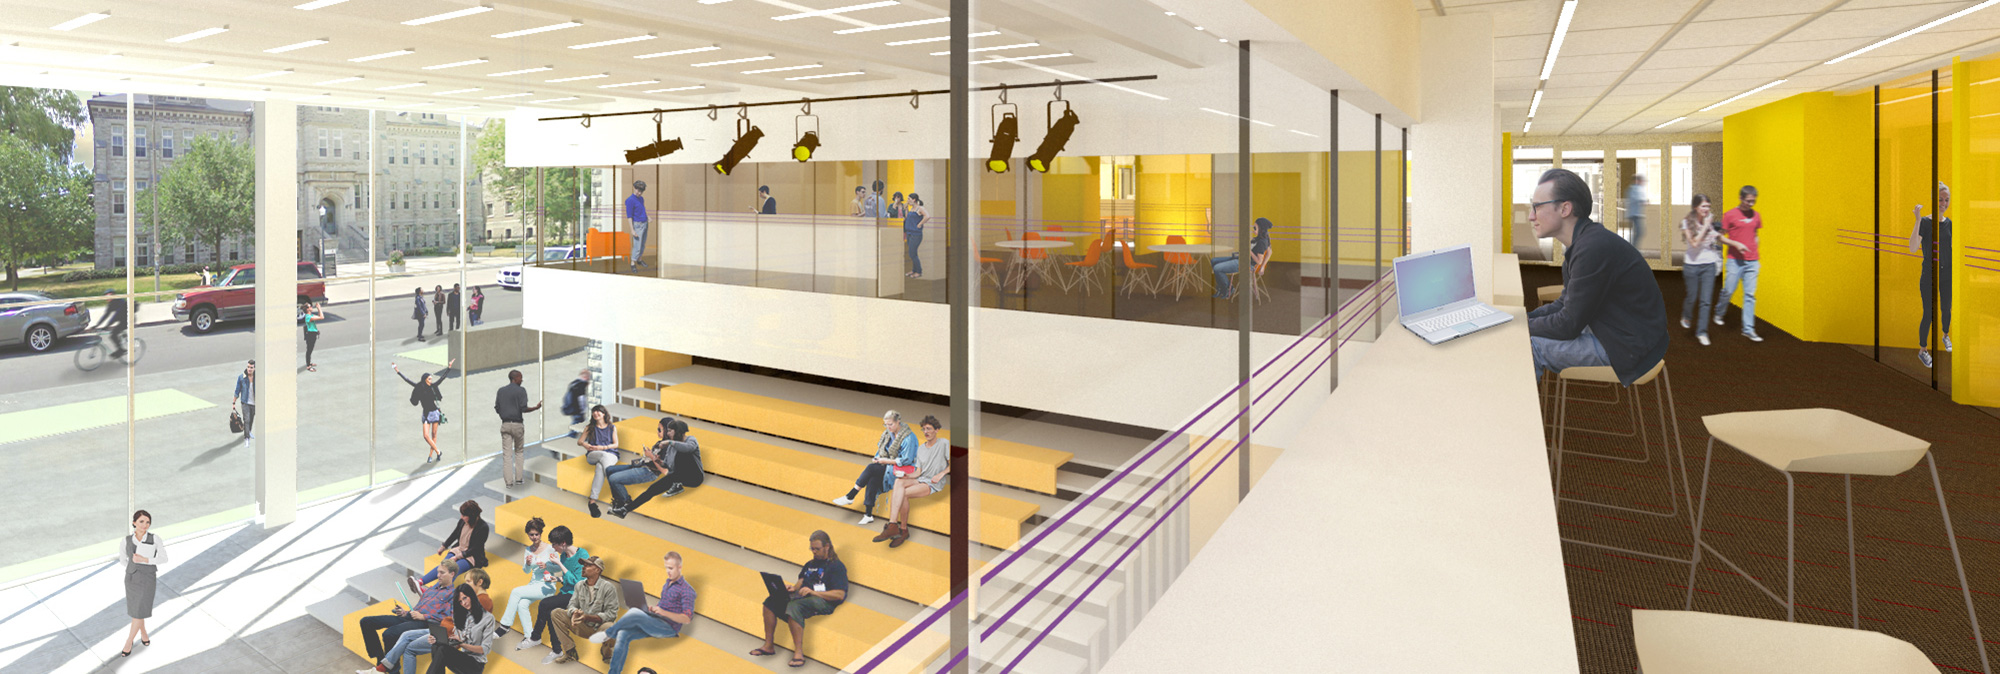 Artist rendering of the interior of the Innovation and Wellness Centre